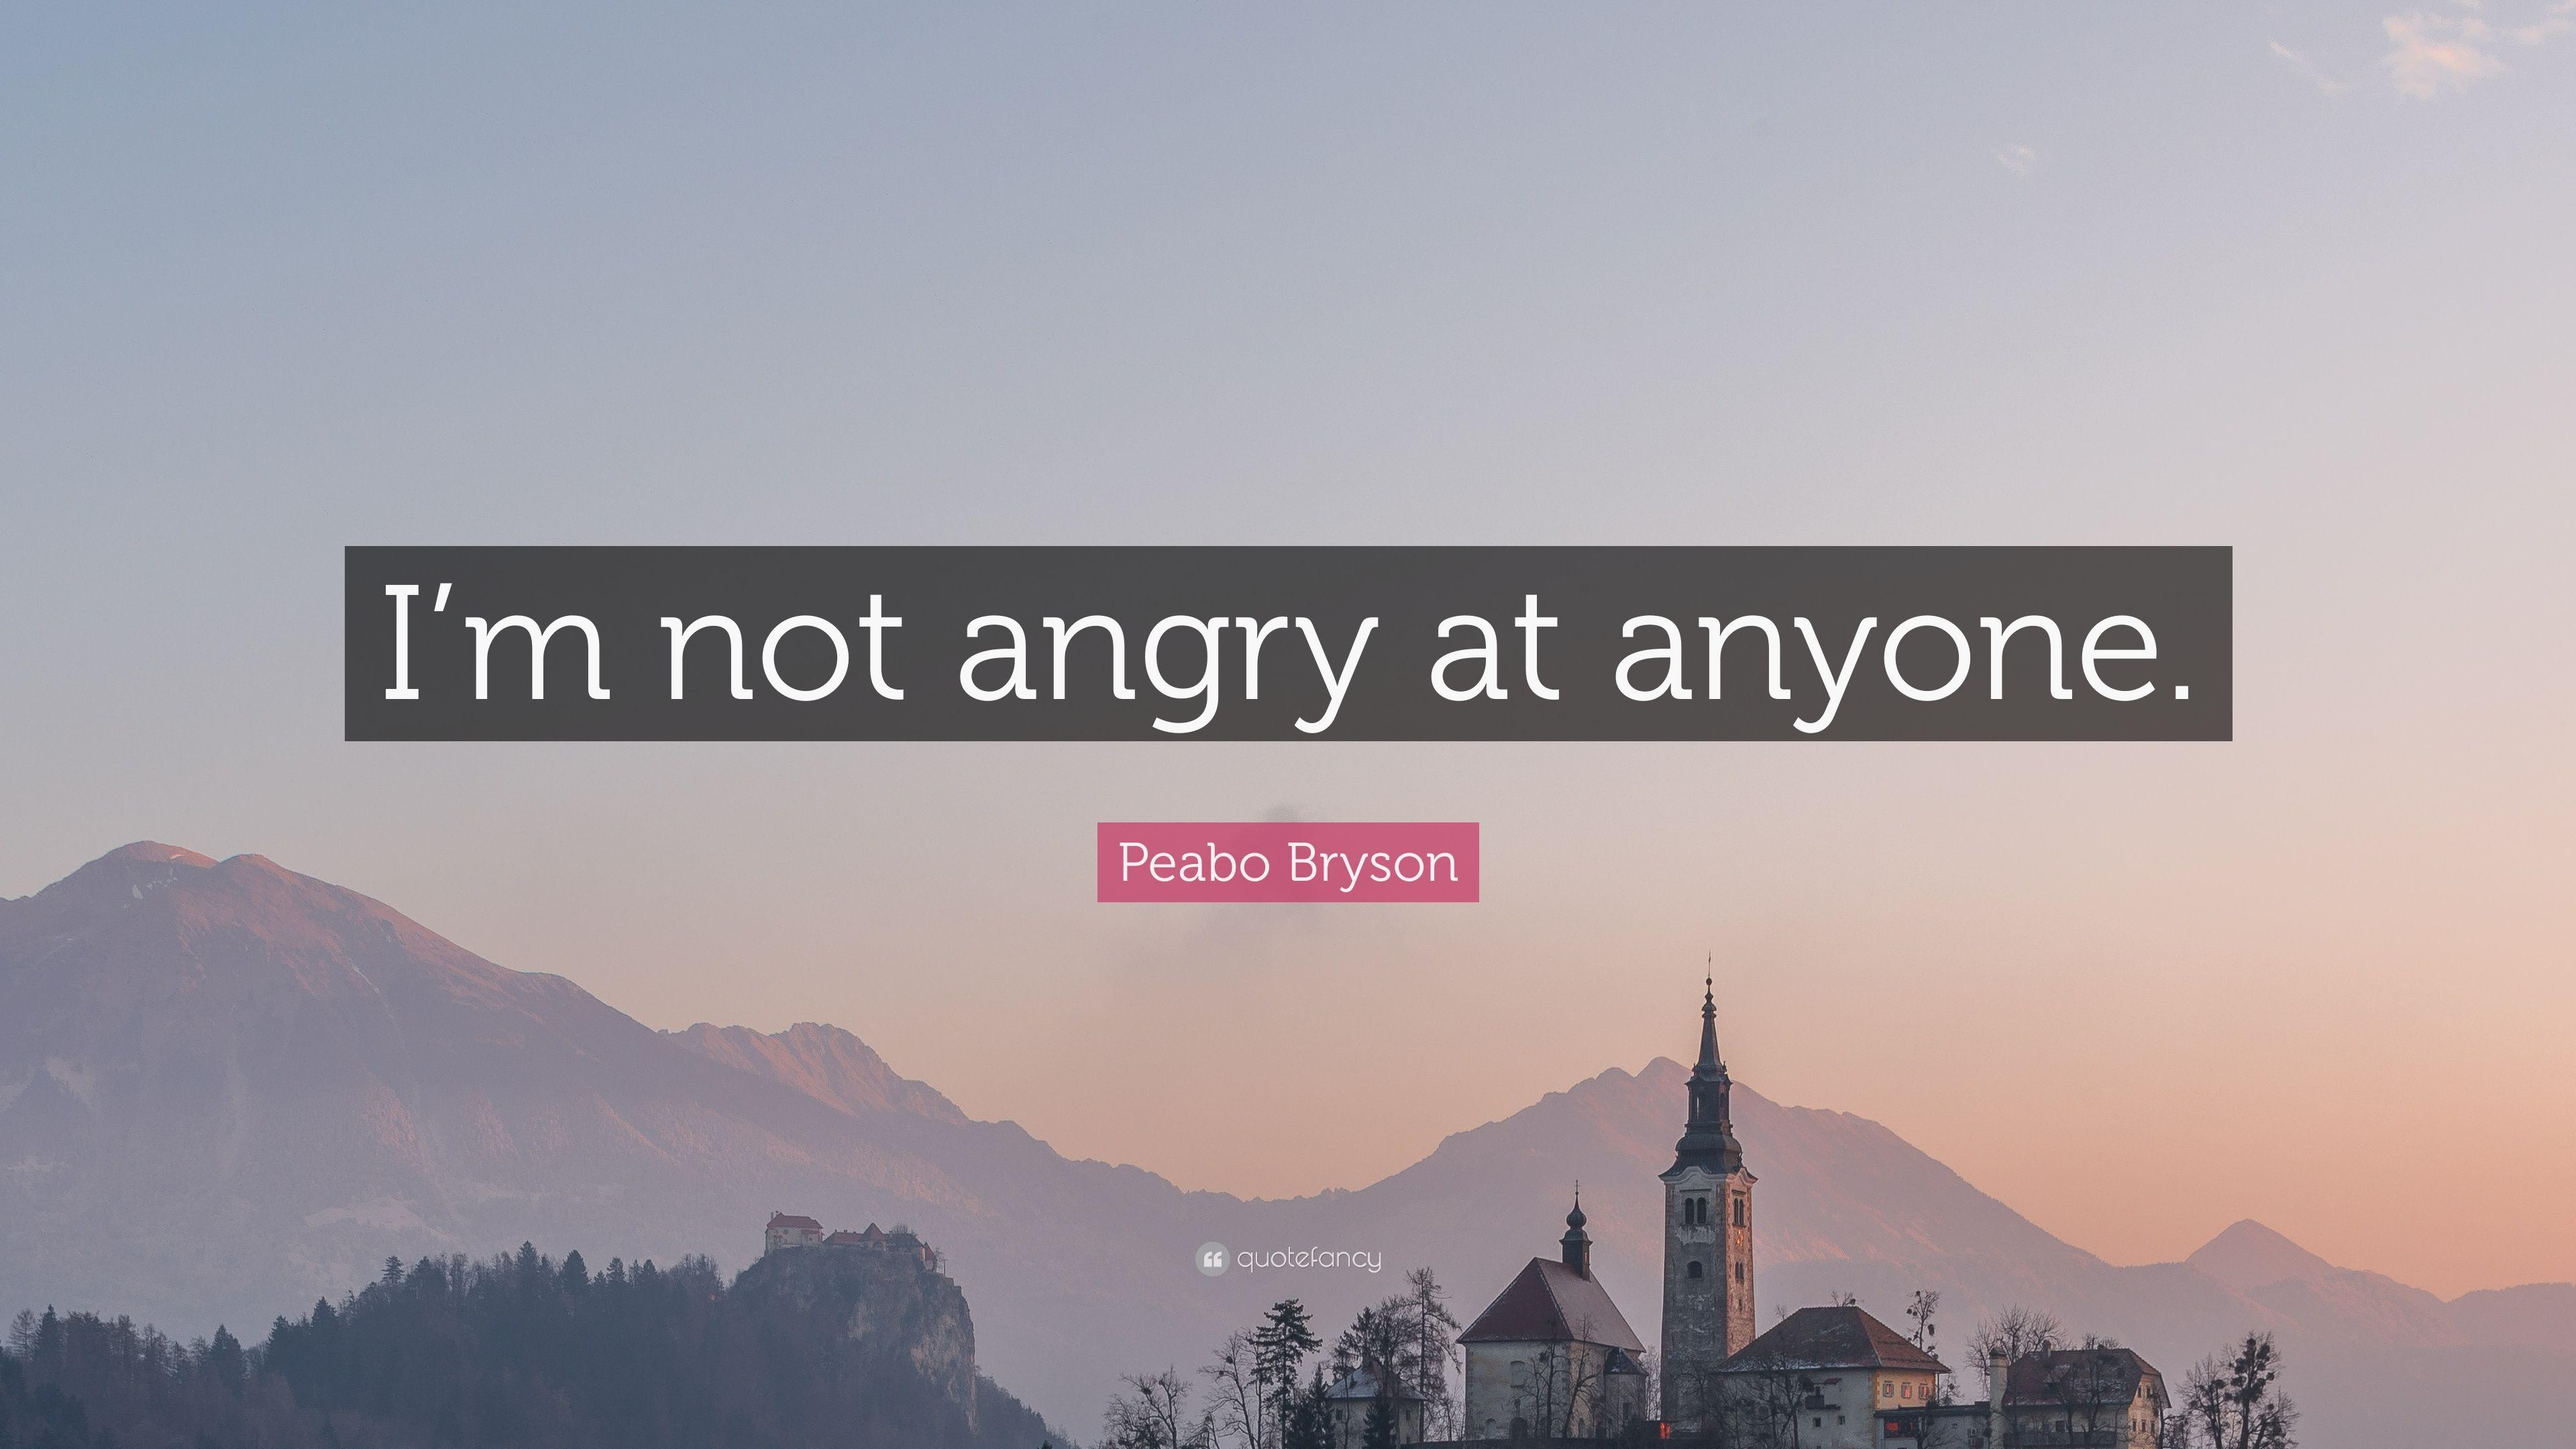 Peabo Bryson Quote: “I'm not angry at anyone.” 7 wallpaper